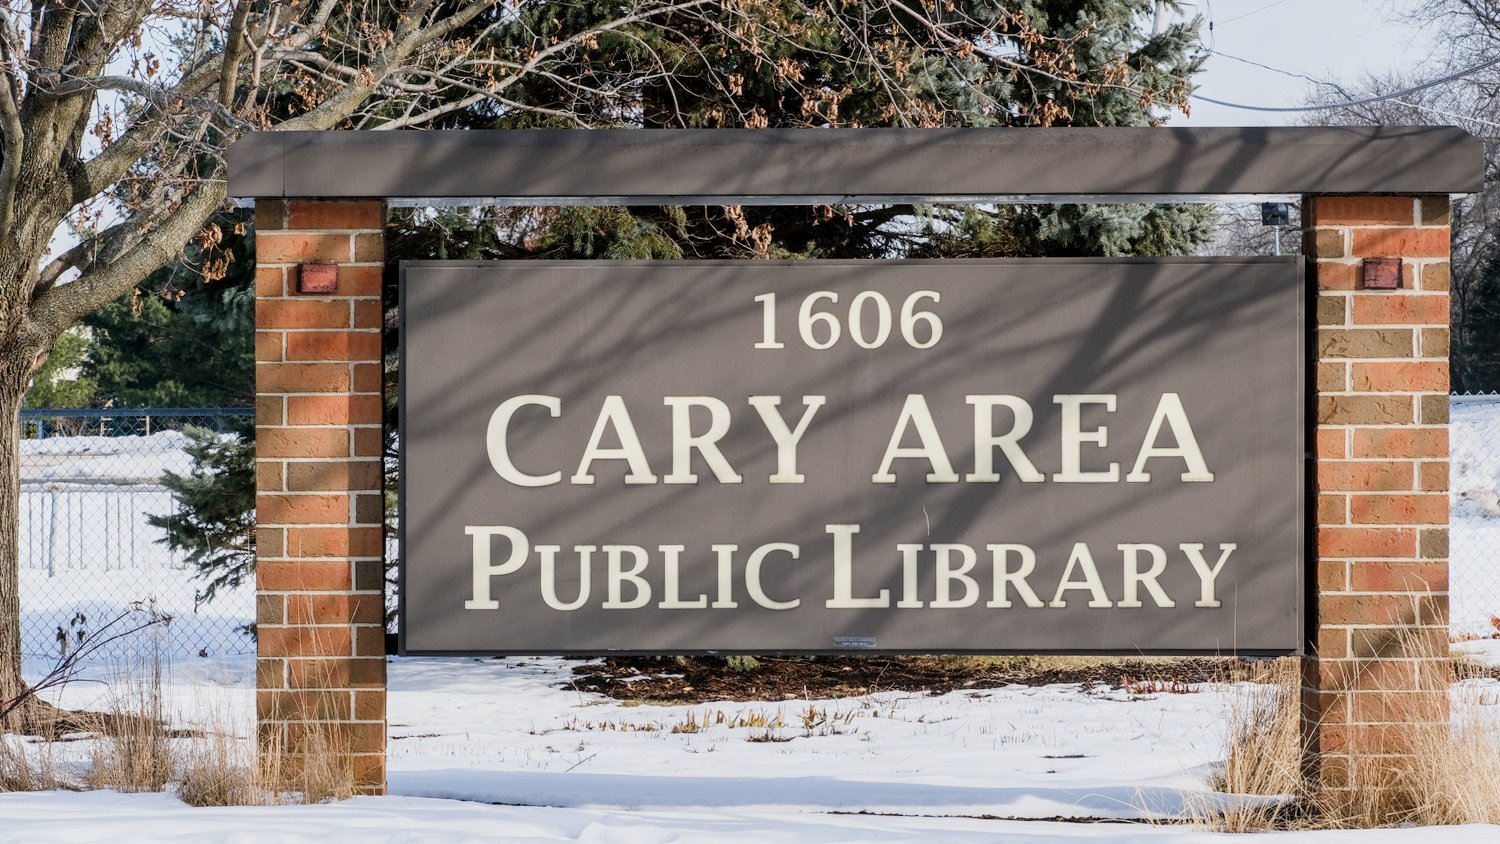 Cary Area Public Library sign.